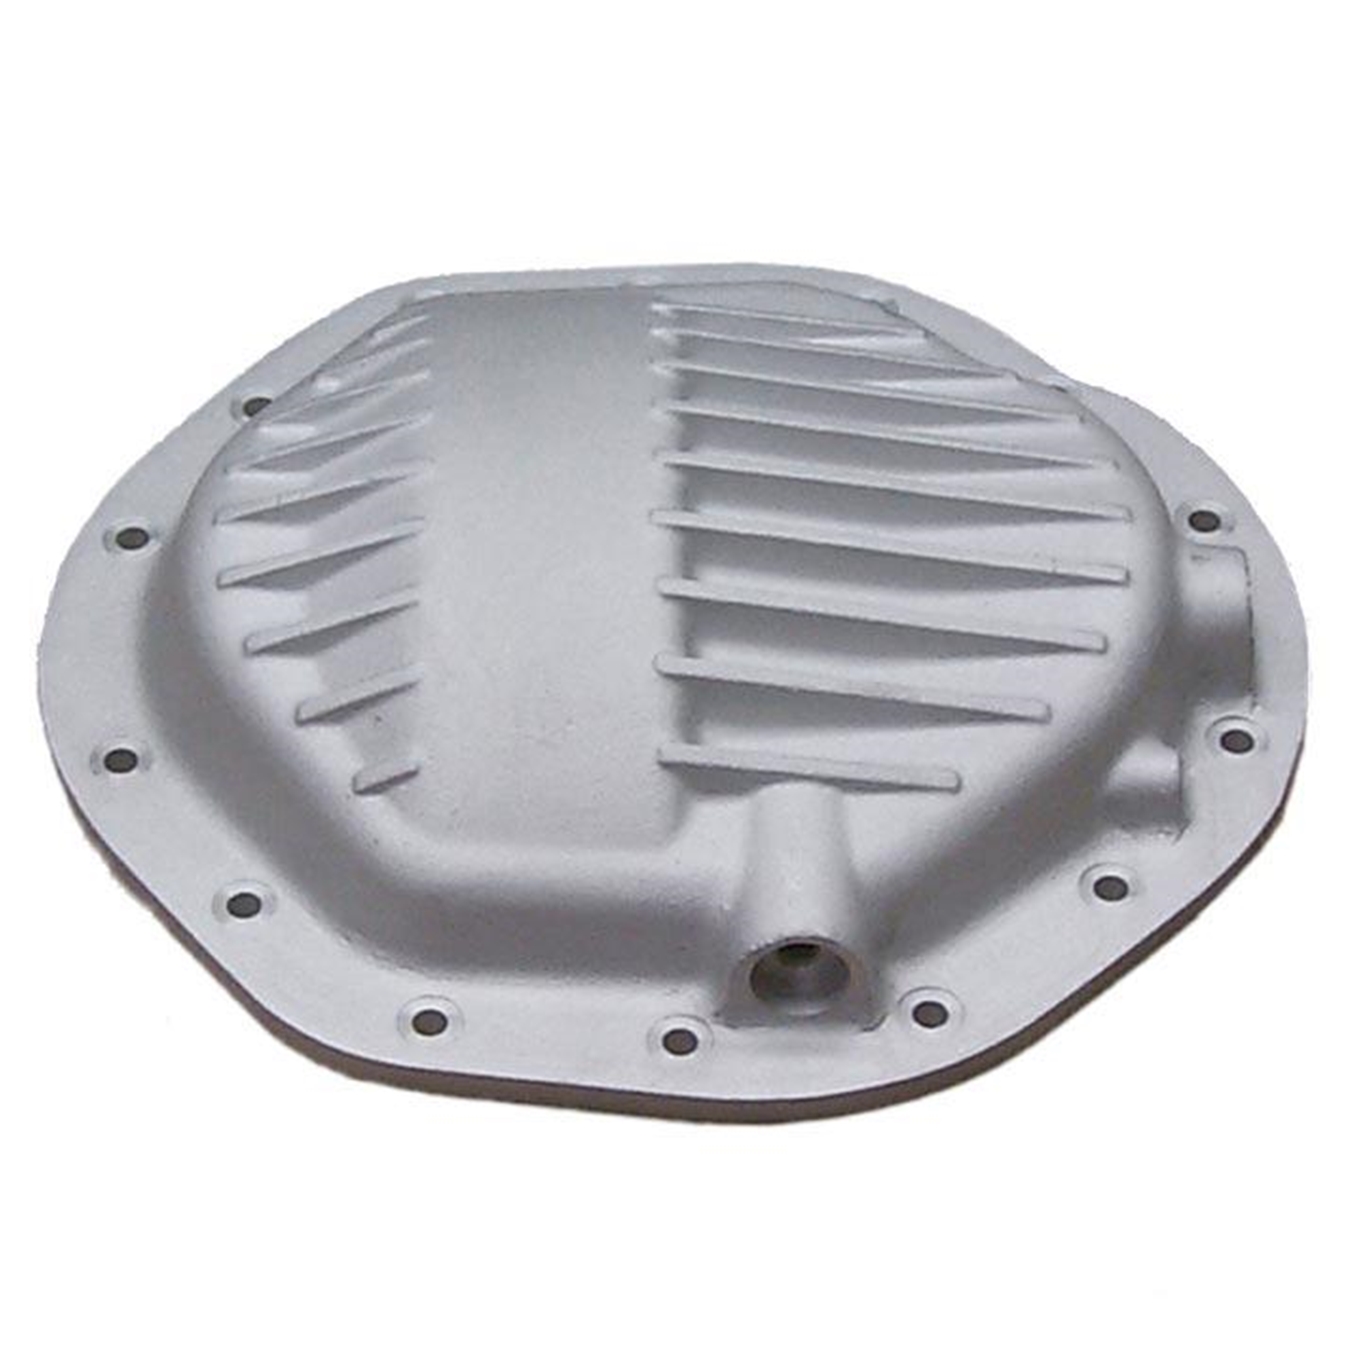 GM 9-1/2" Ring Gear, 14 Bolt Cover for Hummer H2